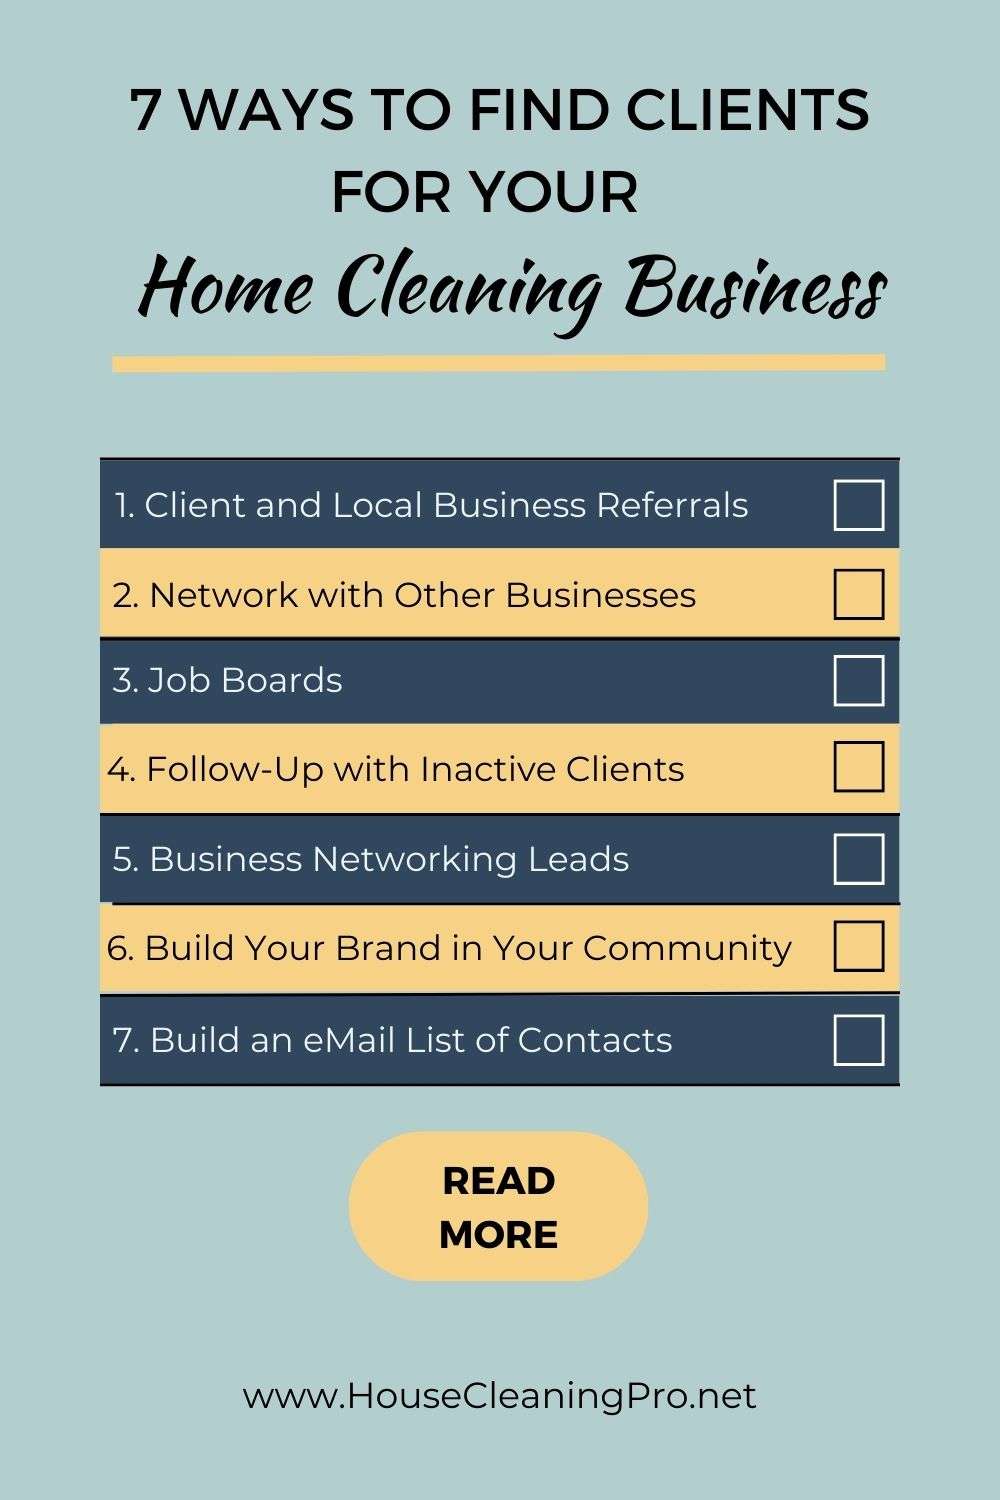 Where to Find Clients for Cleaning Business